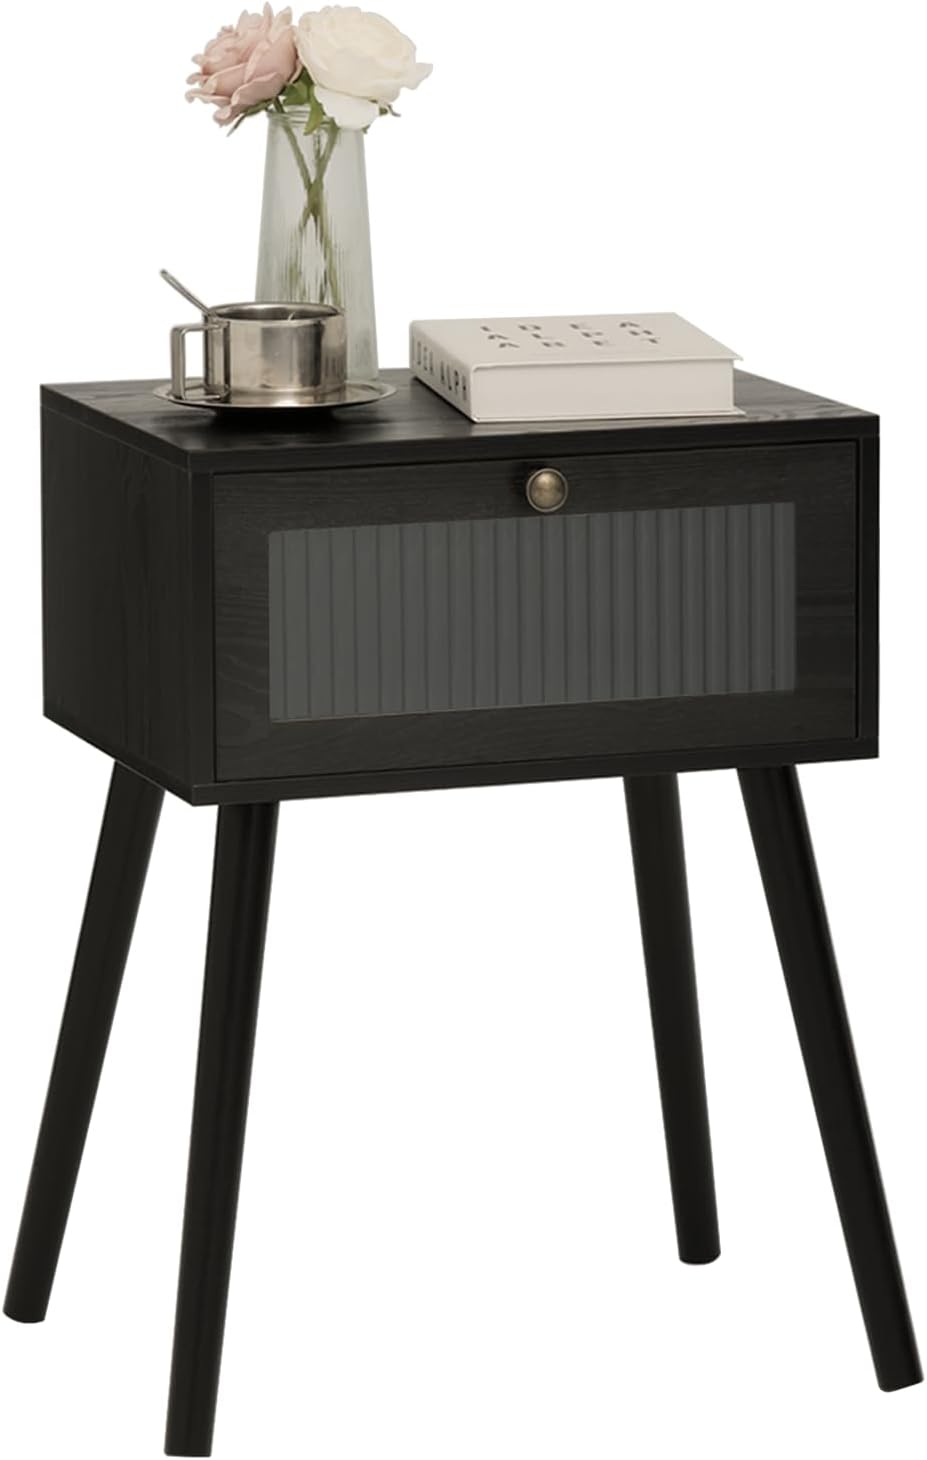 AWASEN Small Nightstand with Drawer, Black Modern Bedside Table with Storage, Side Table Bedroom End Table with Storage and Solid Wood Legs for Living Room and Small Space (Black)